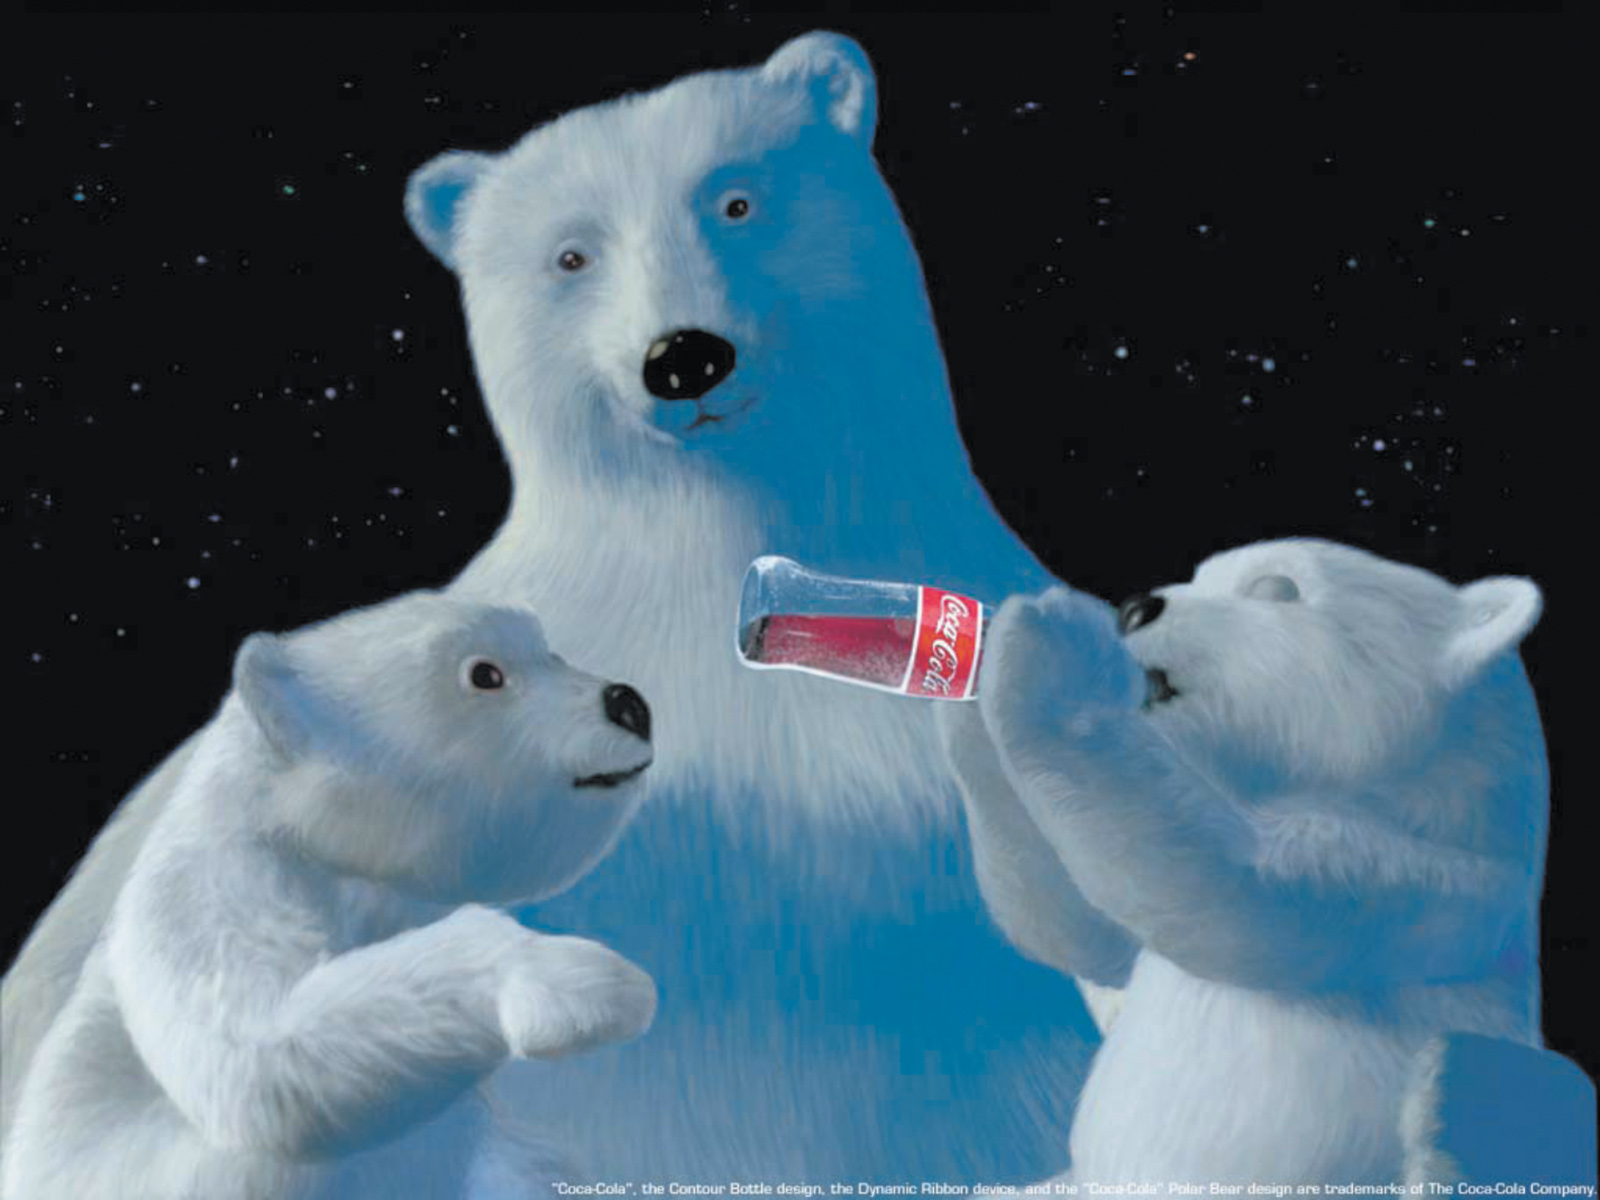 One of Coke’s polar bear advertisements, the first of which appeared in 1922. ‘As the real-life animal has become associated with global warming, melting glaciers, and drowning polar bear cubs,’ Natalie Angier writes, ‘Coca-Cola has modified its message to present itself as the bear’s best friend and protector.’